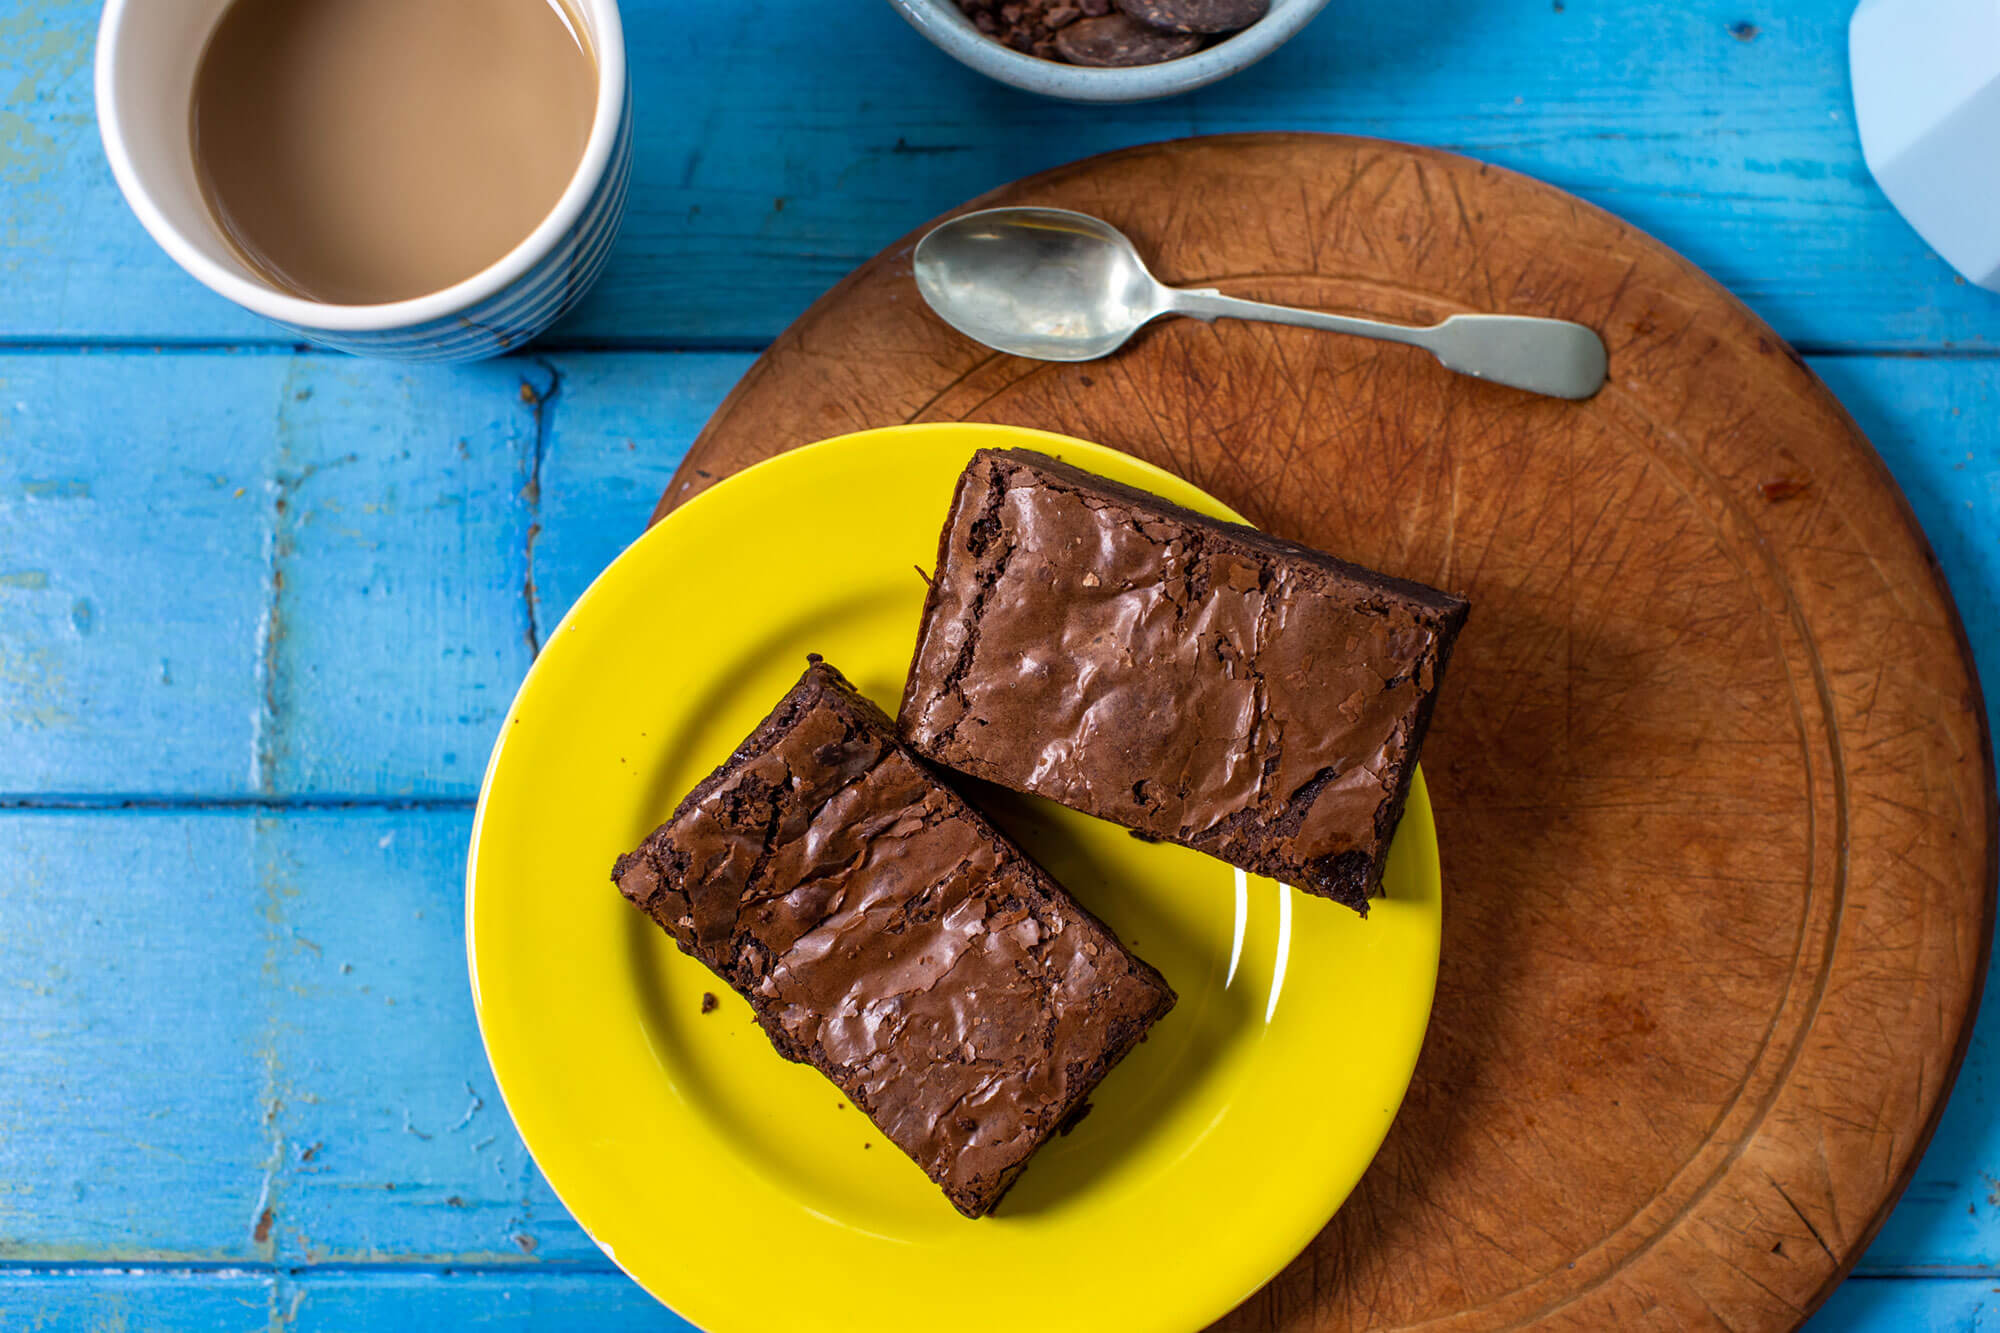 Rolly's Brownies, perfect with a cuppa